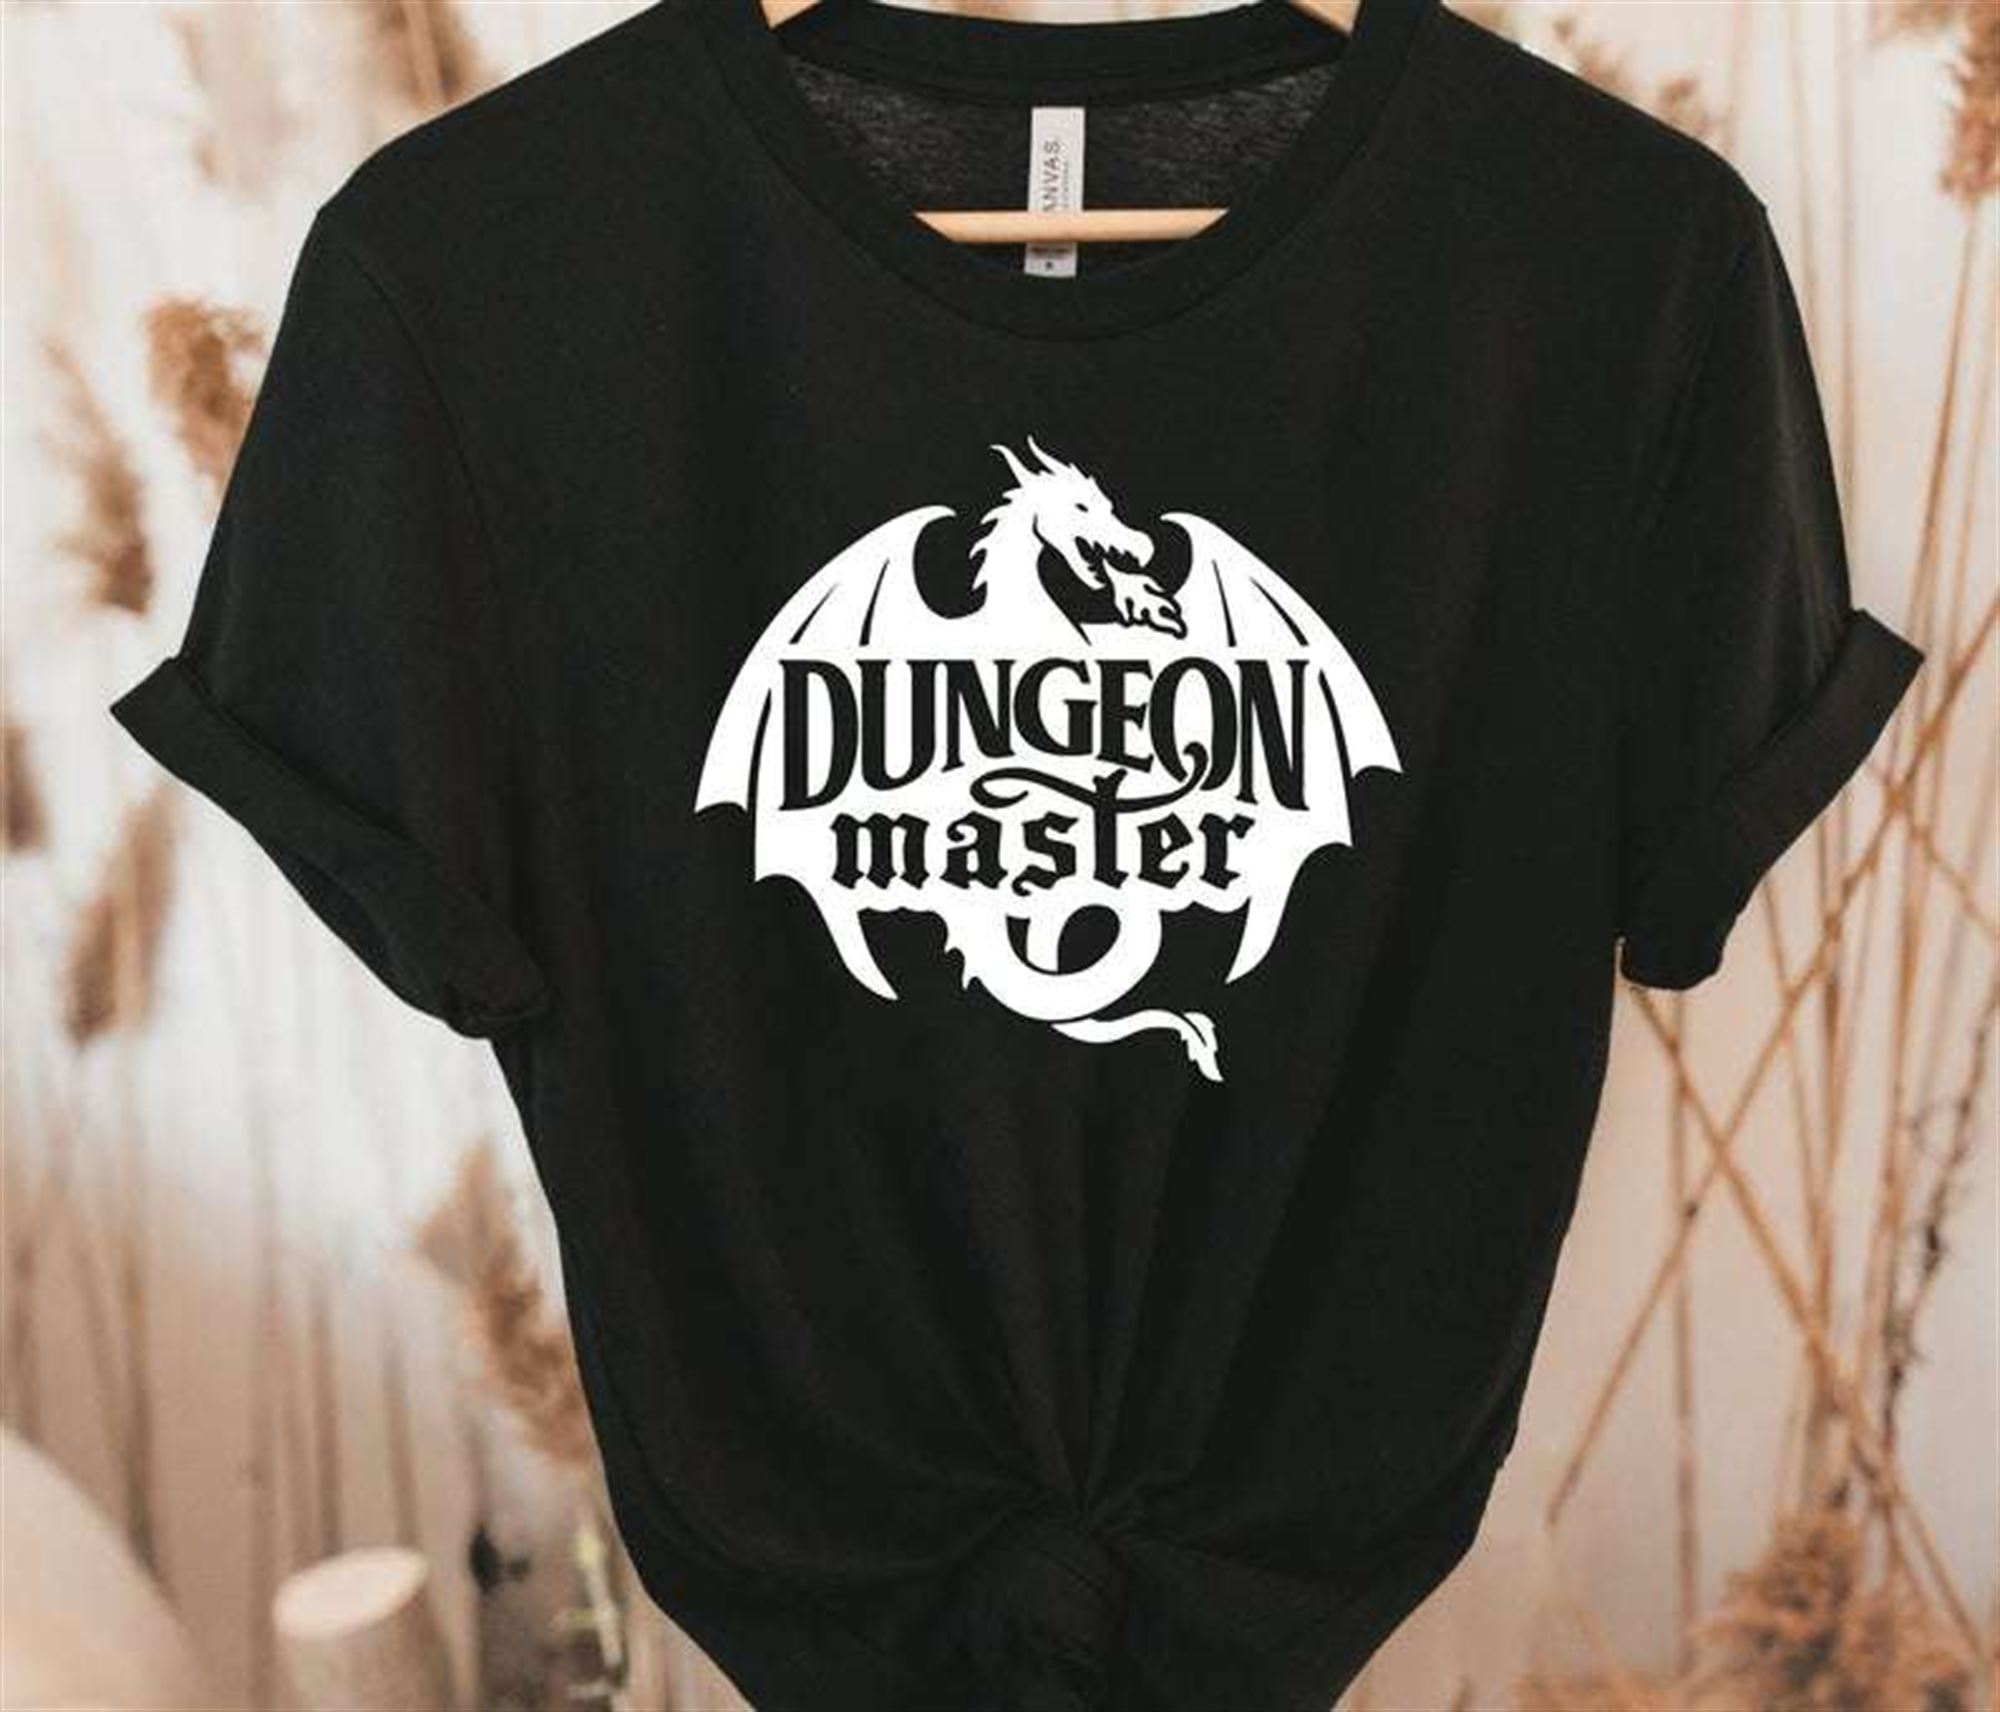 Dungeon Master Unisex T Shirt Plus Size Up To 5xl